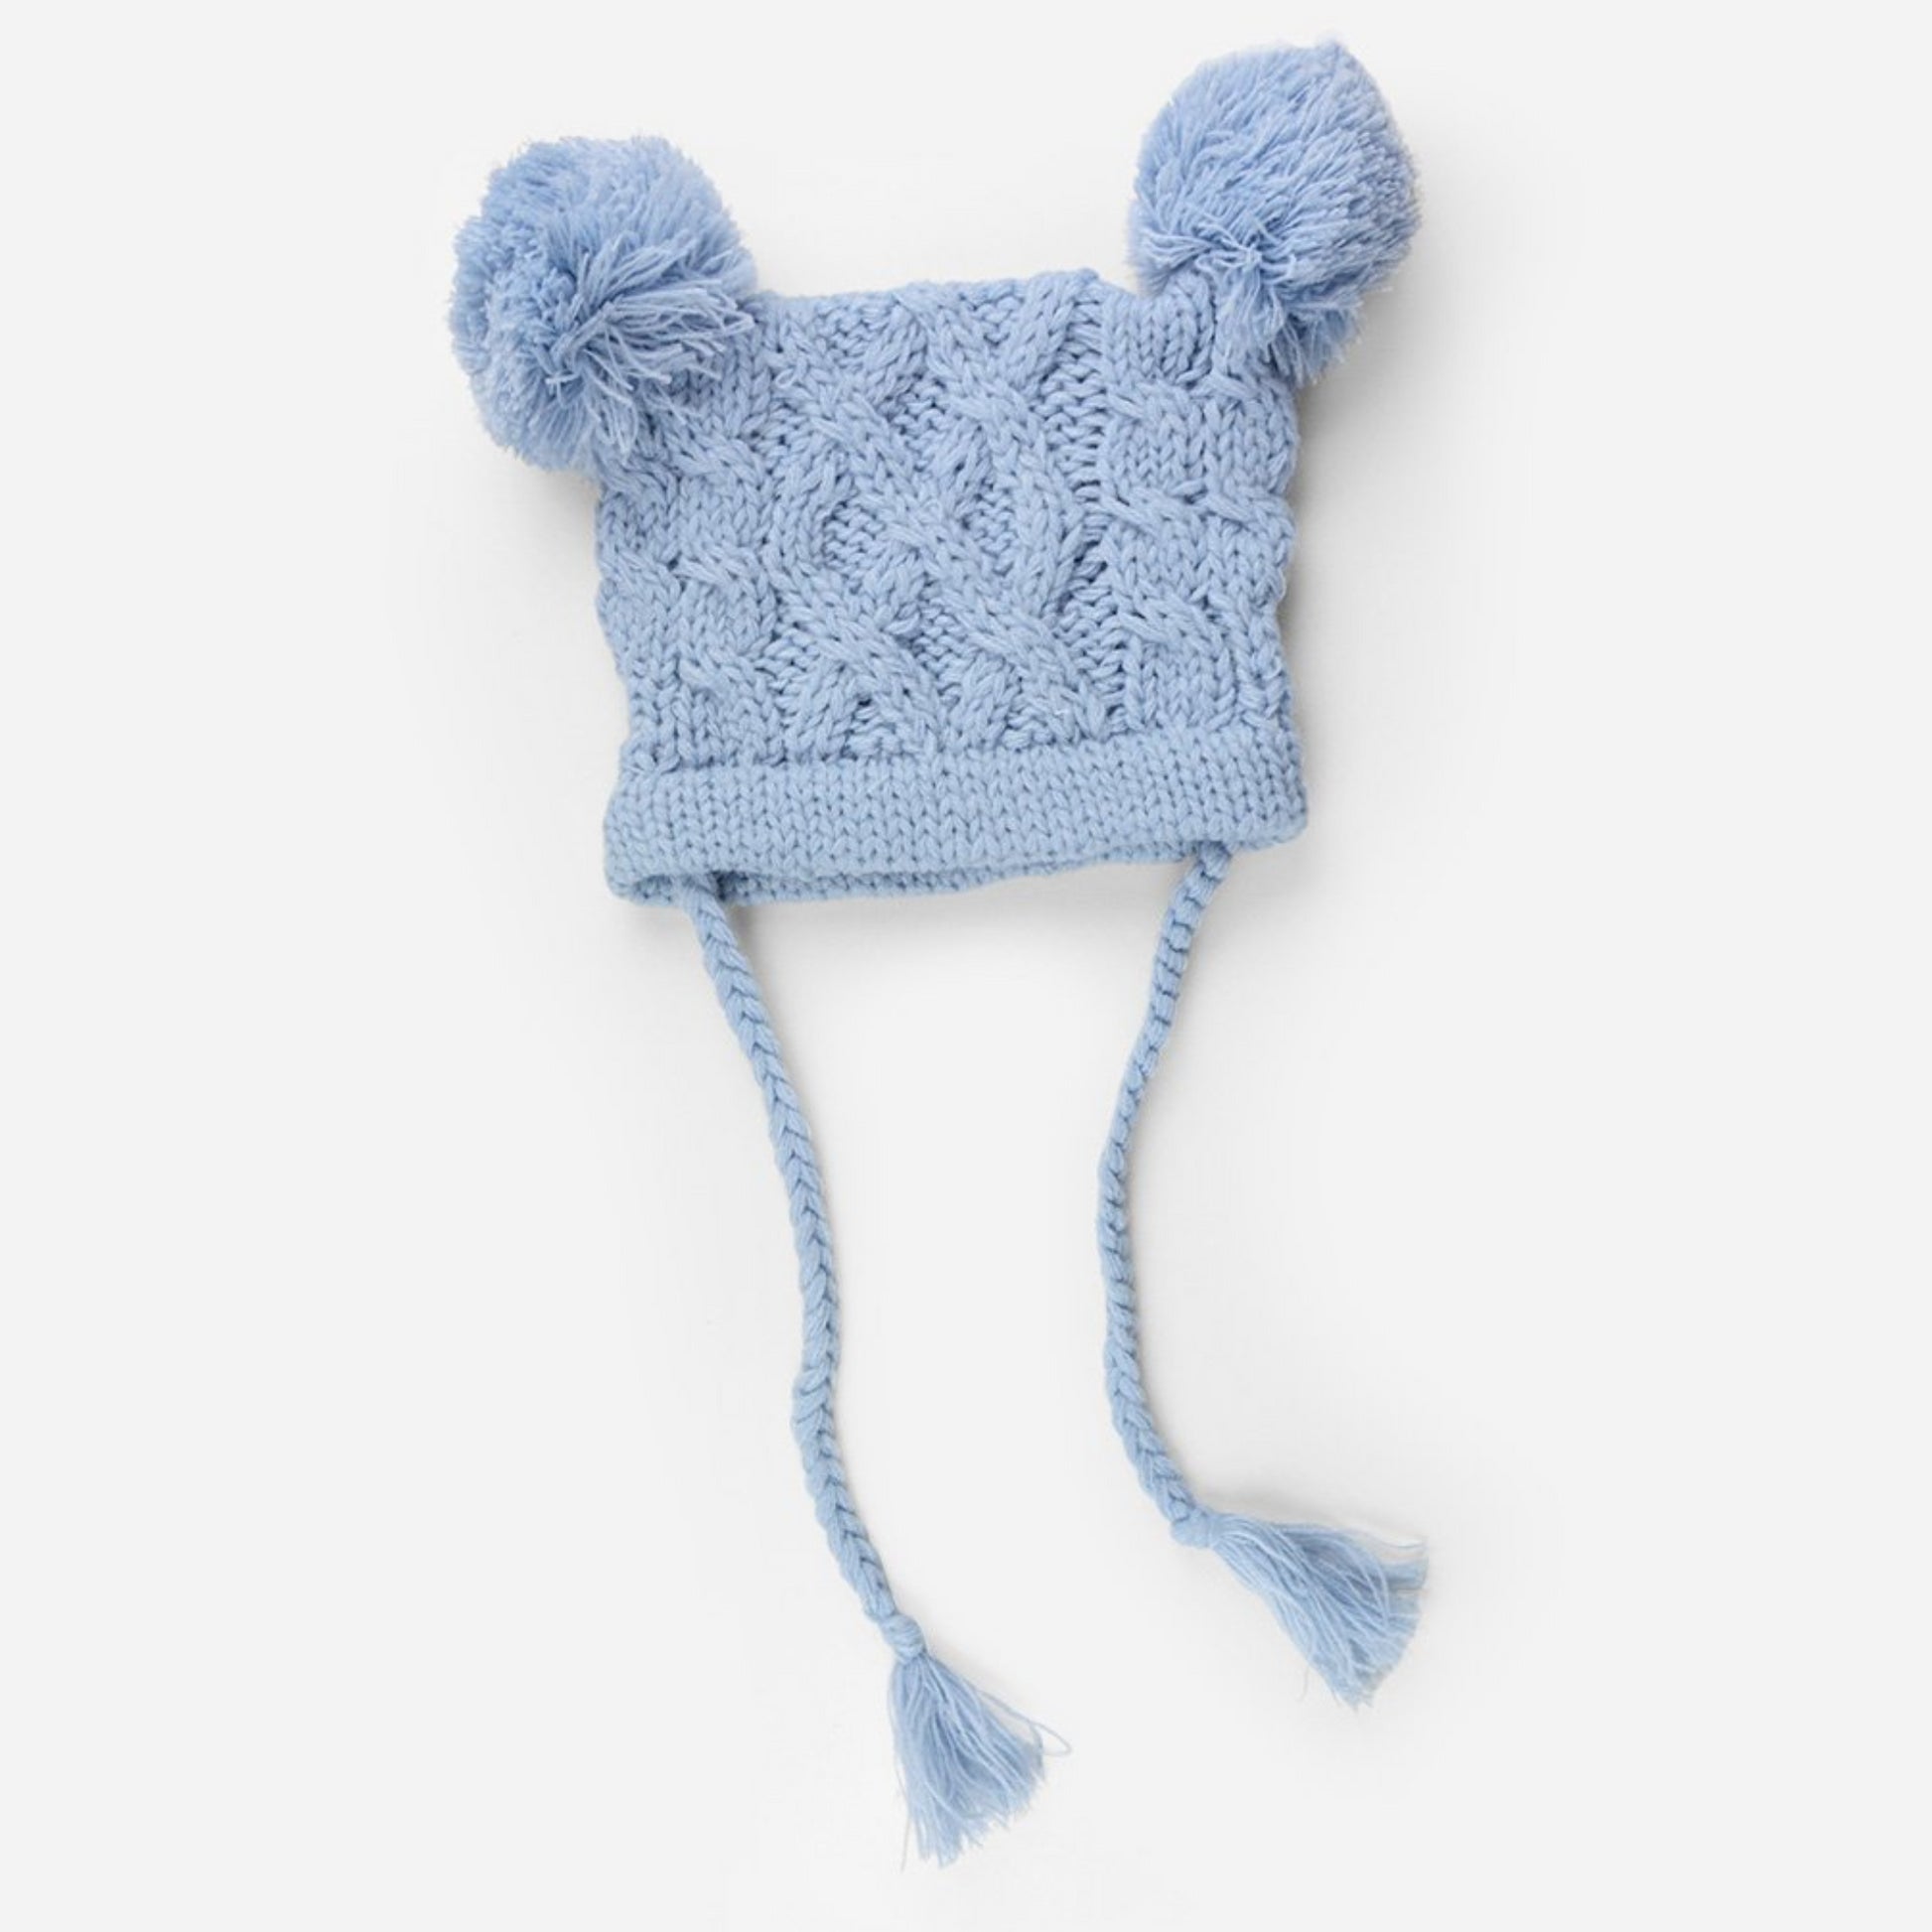 cable knit hat for baby with poms and tassels blue